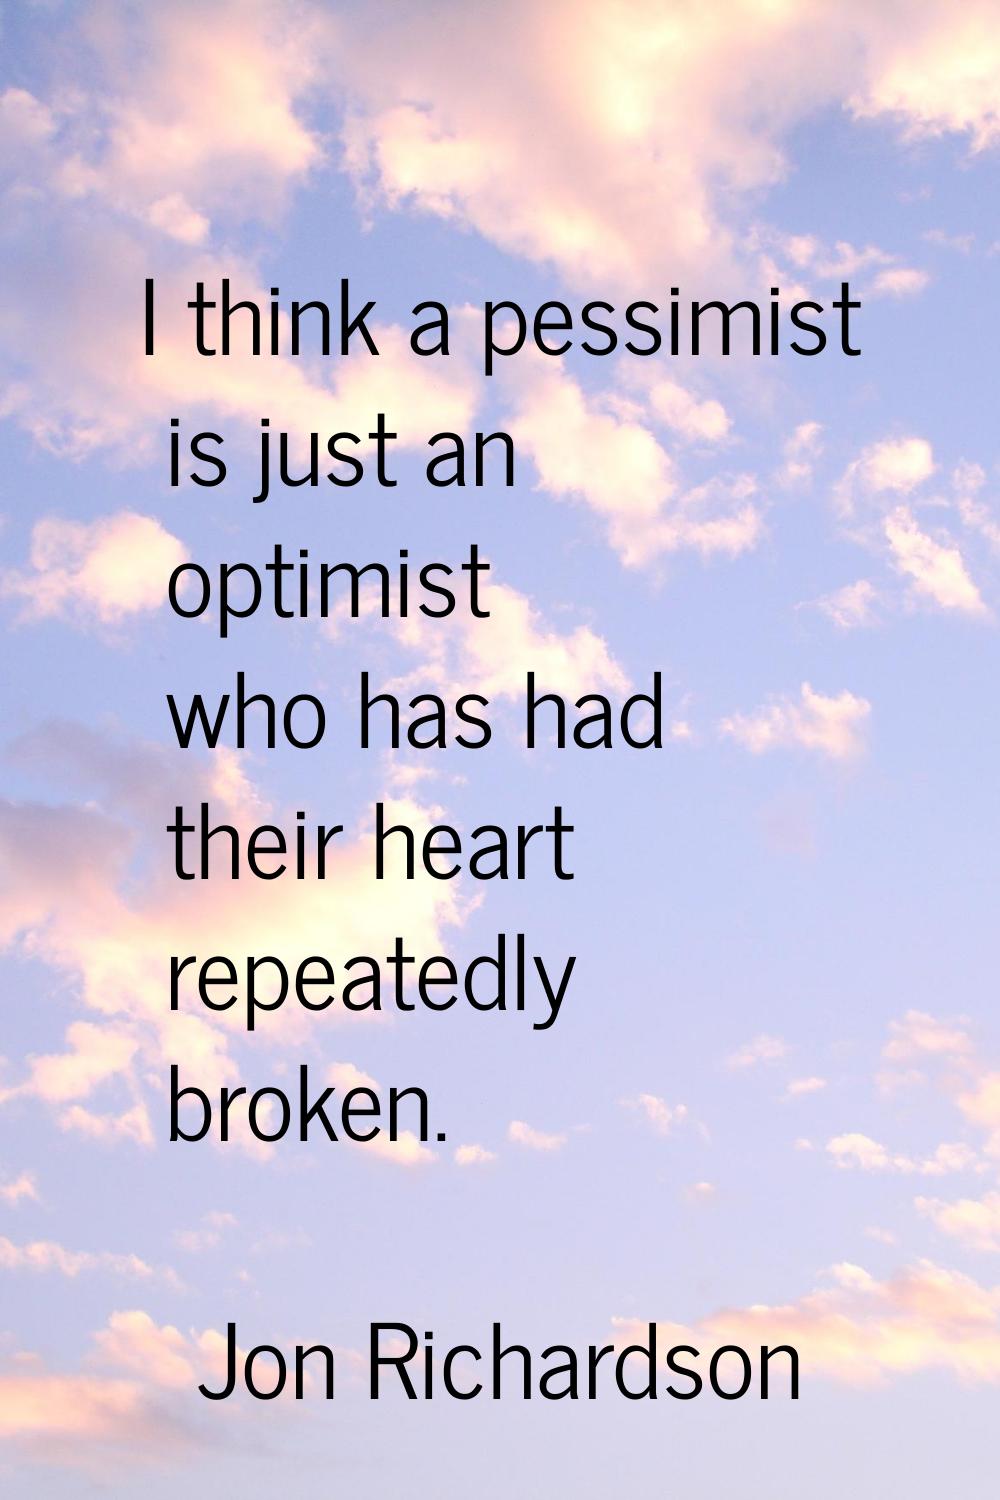 I think a pessimist is just an optimist who has had their heart repeatedly broken.